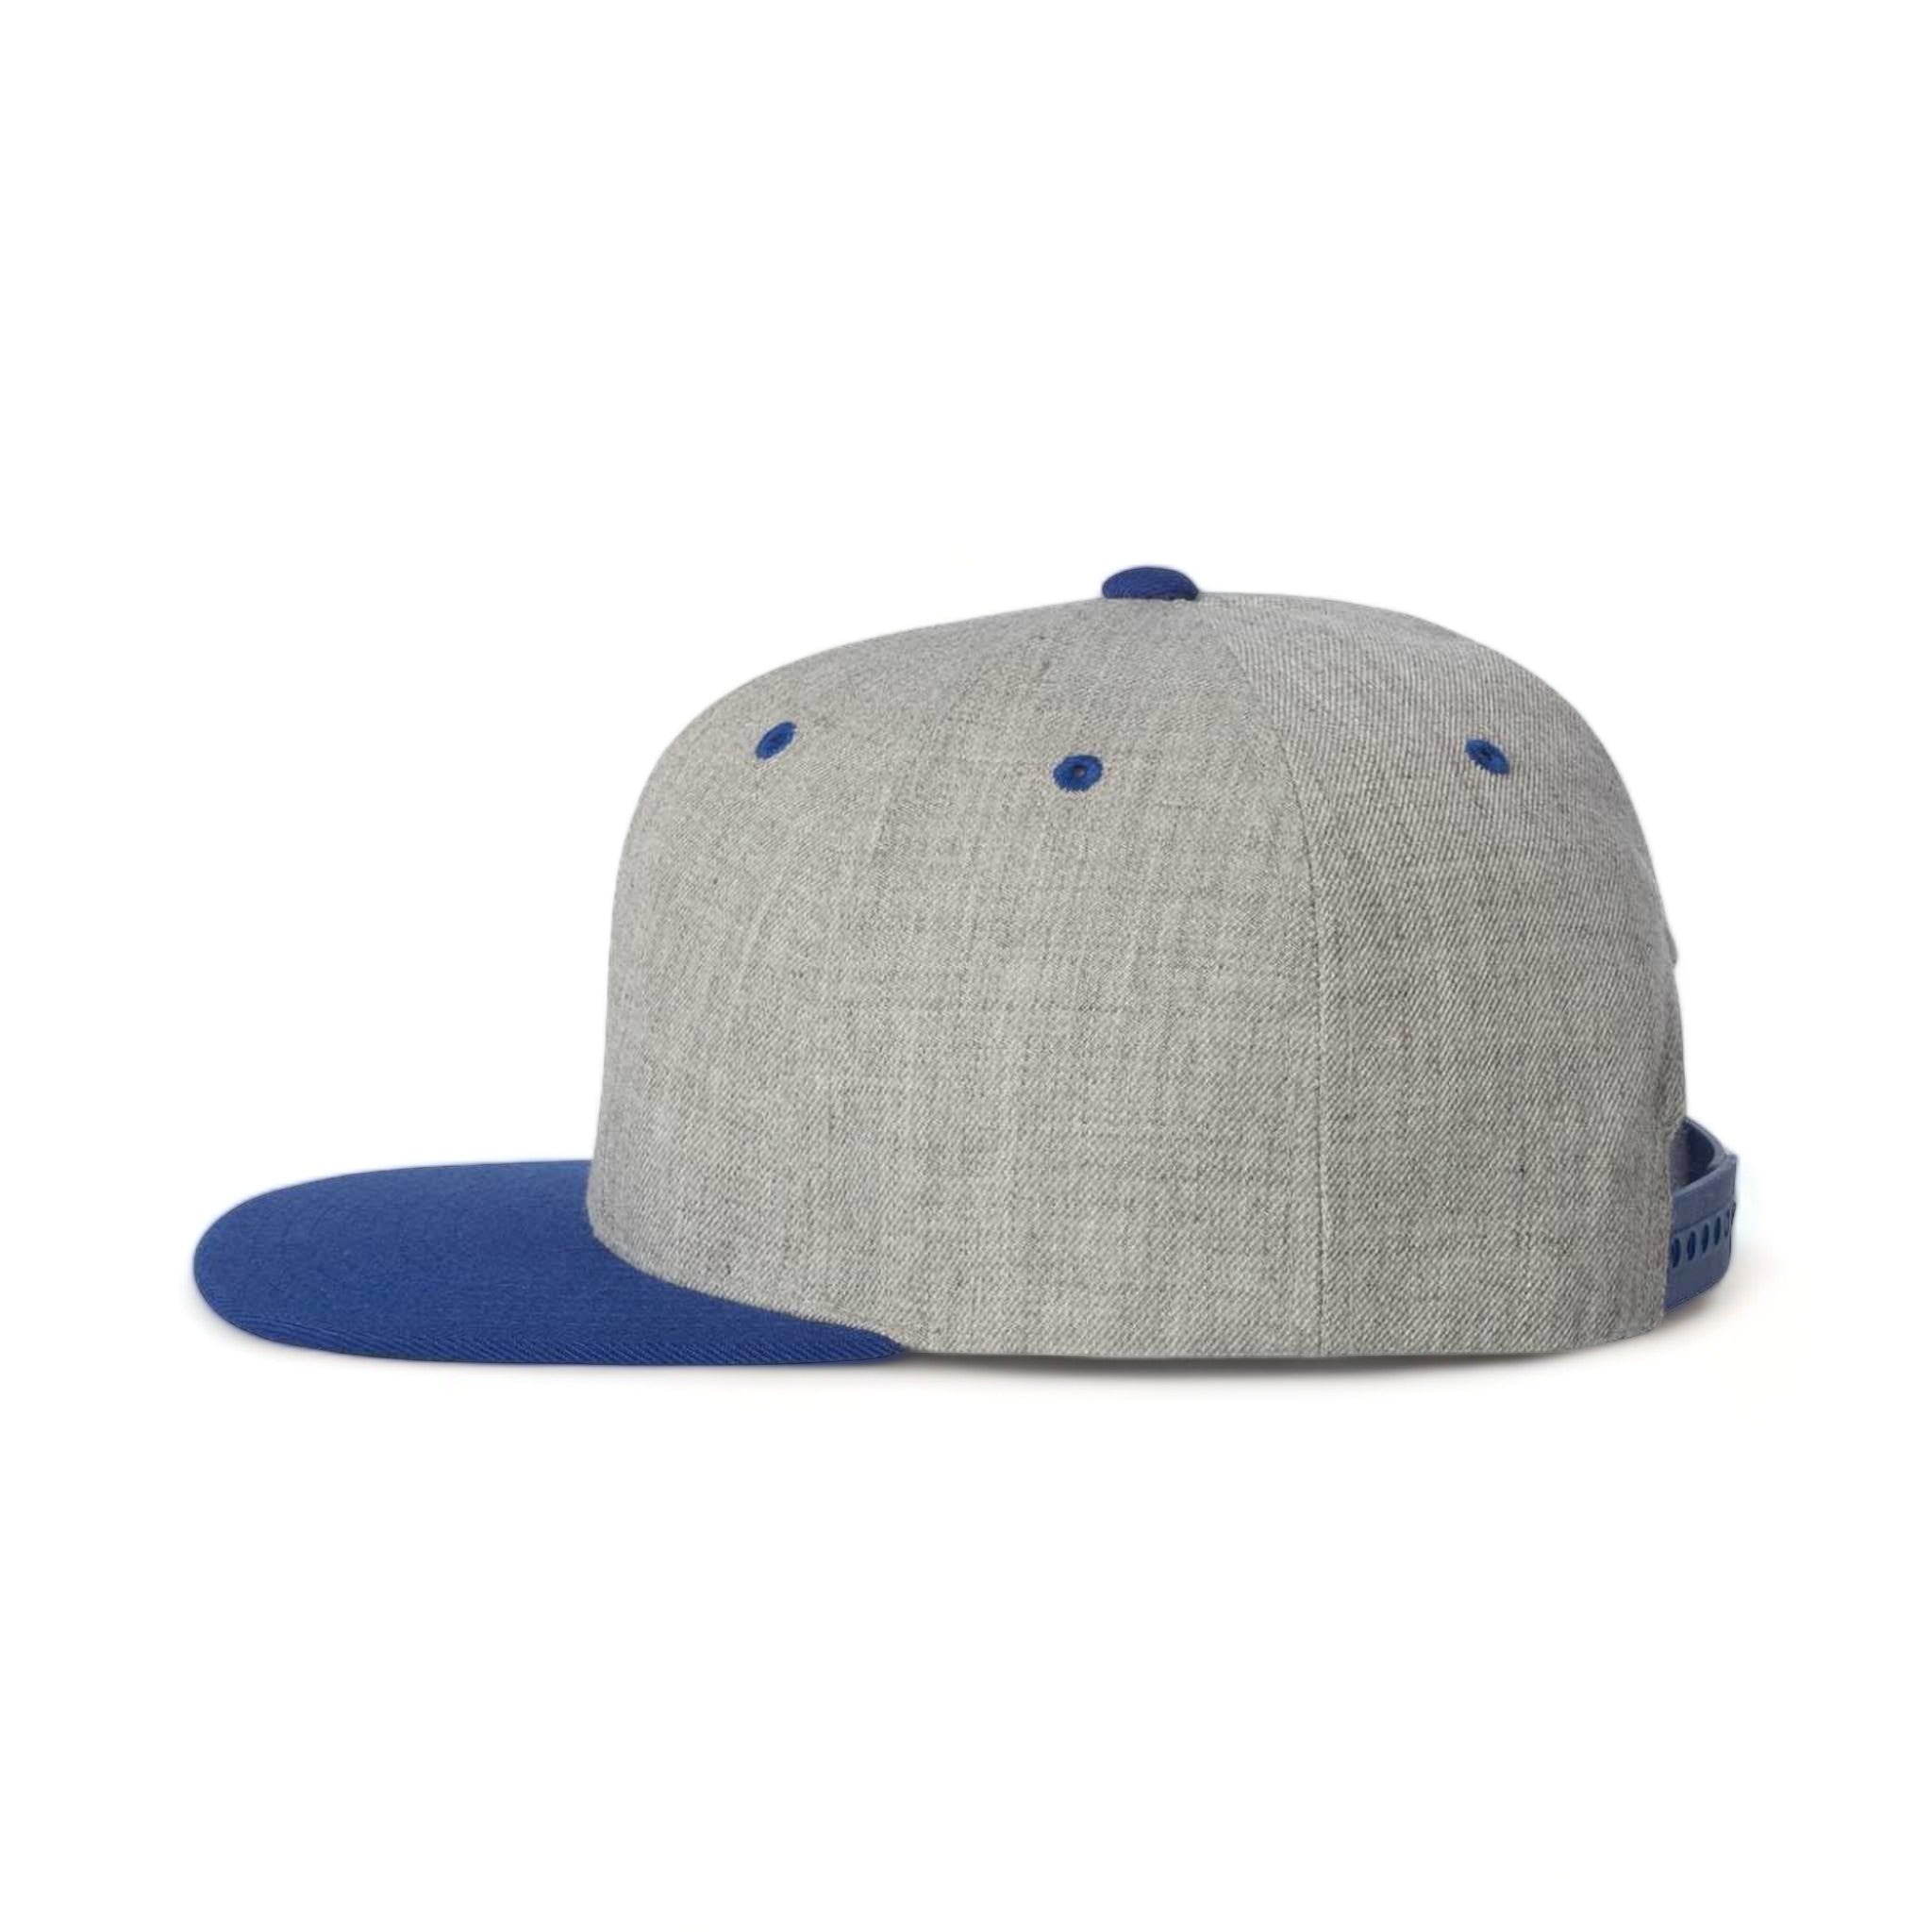 Side view of YP Classics 6089M custom hat in heather grey and royal